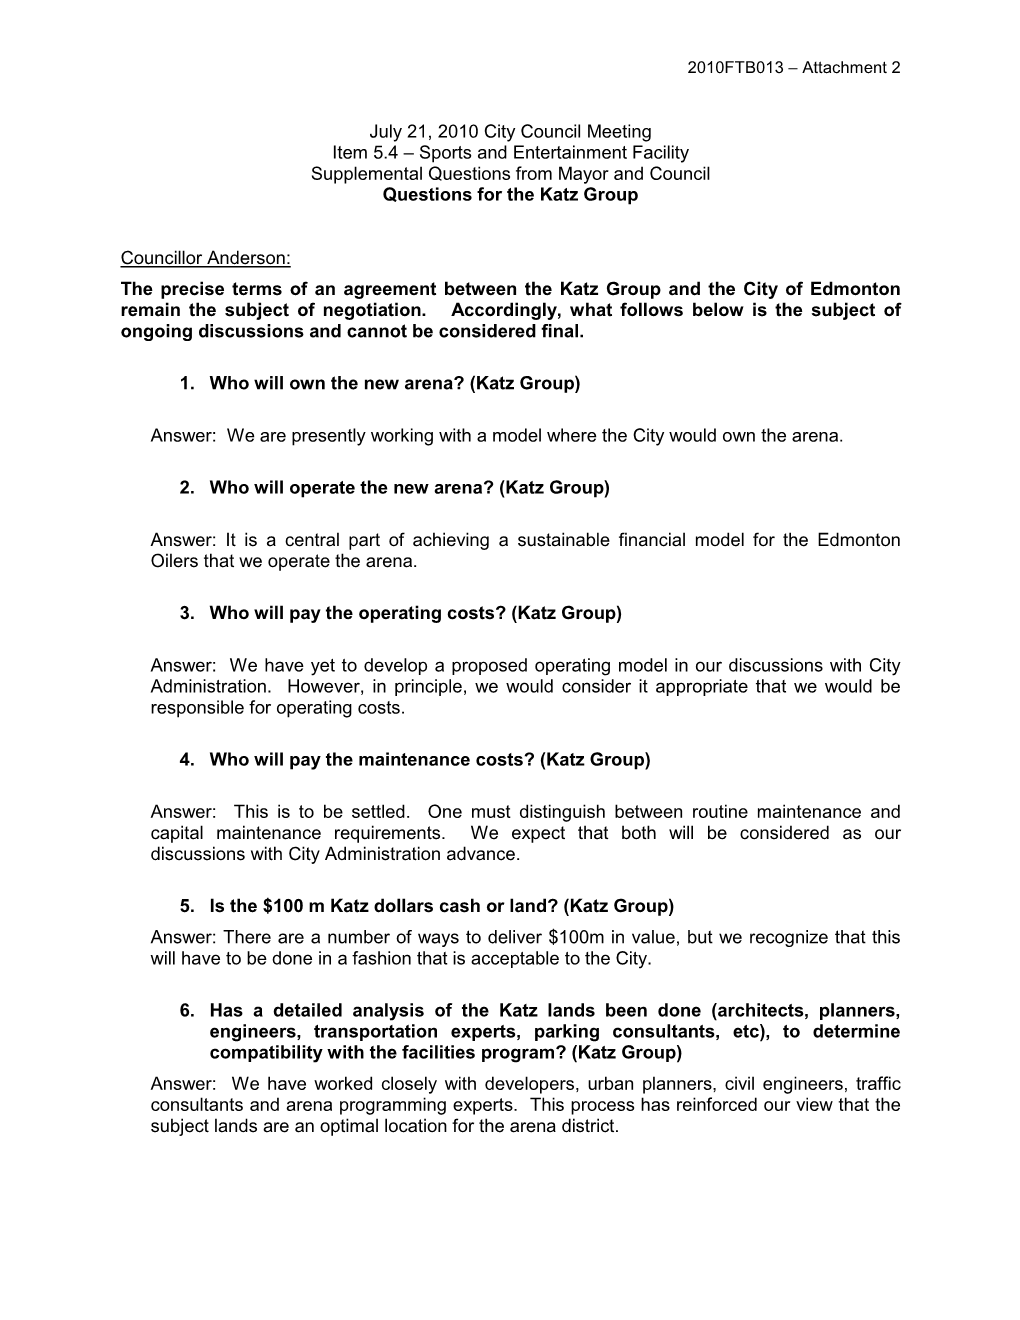 July 21, 2010 City Council Meeting Item 5.4 – Sports and Entertainment Facility Supplemental Questions from Mayor and Council Questions for the Katz Group